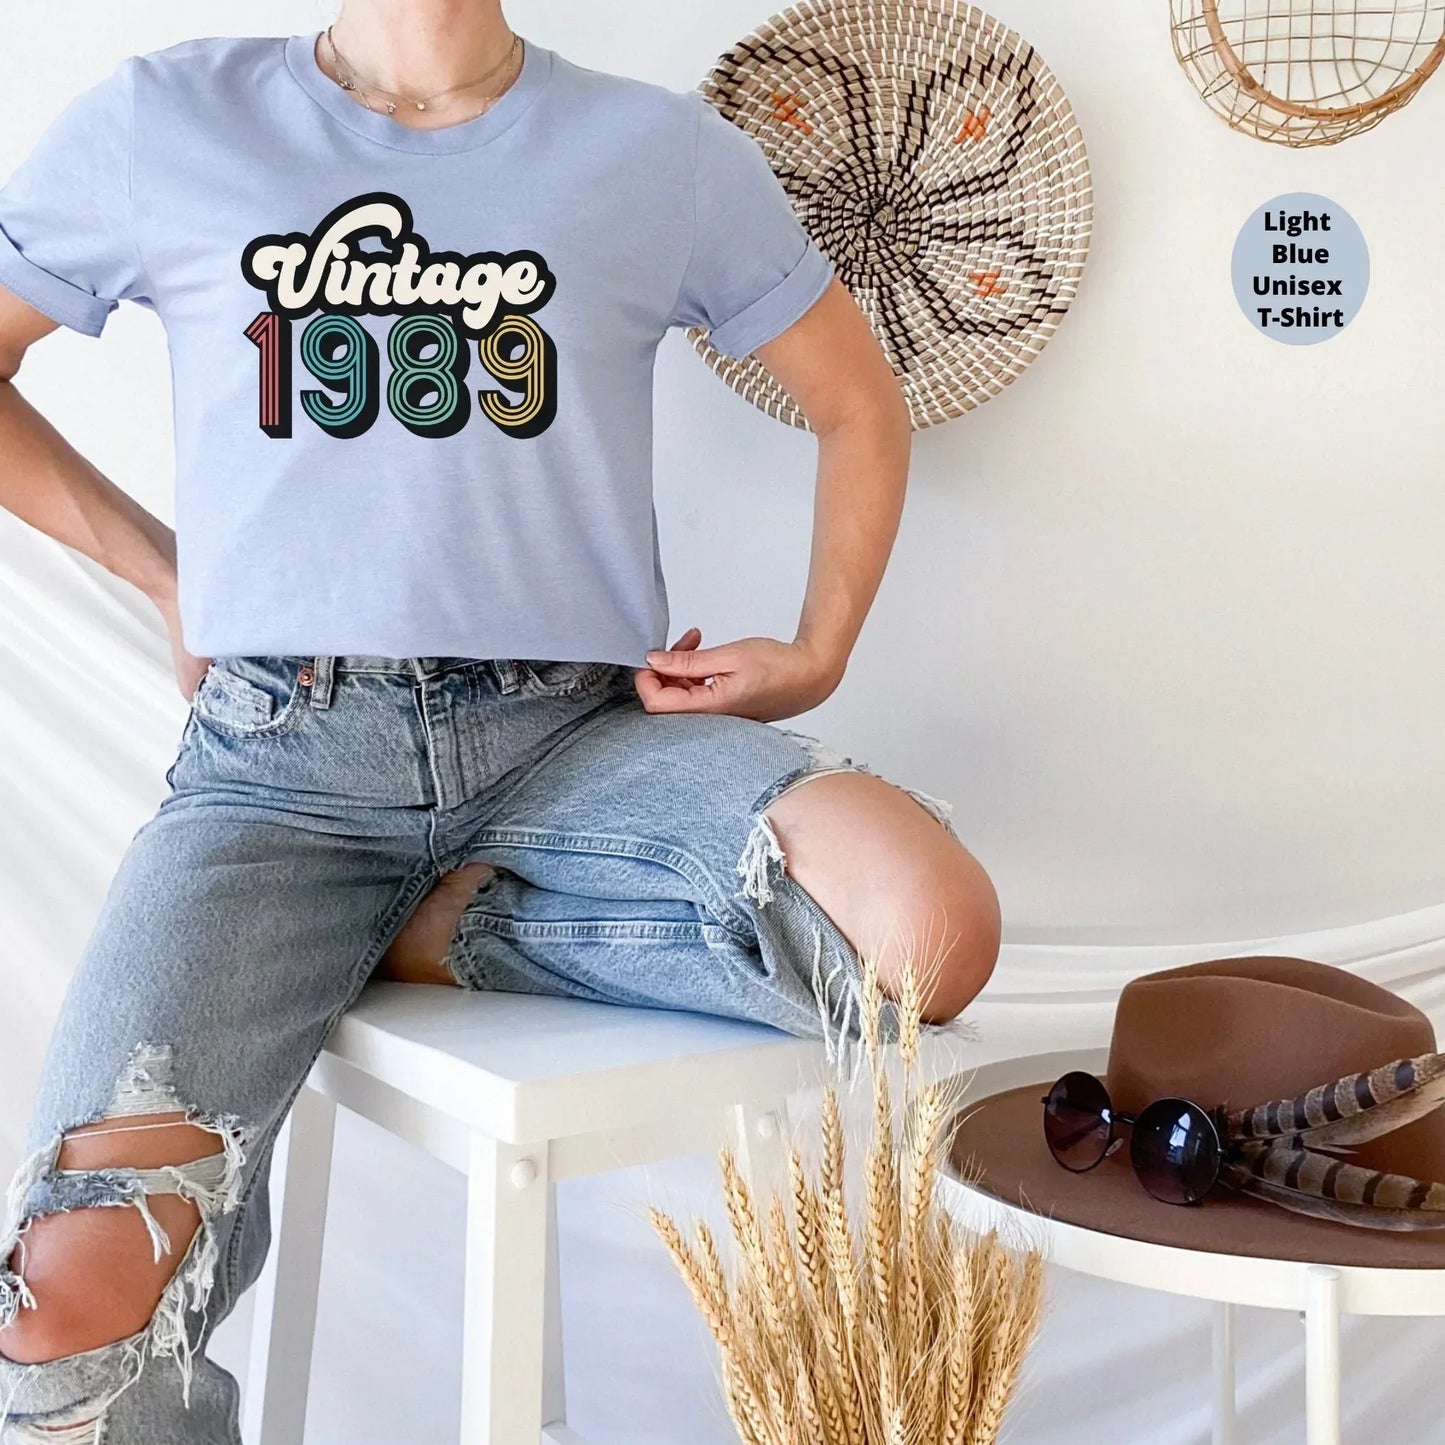 Vintage 1989, 33th Birthday Group Shirts, Birthday Crew, Birthday Squad, 33th Birthday Tee, Birthday Gift, Birthday Party Tees, Gift for Her